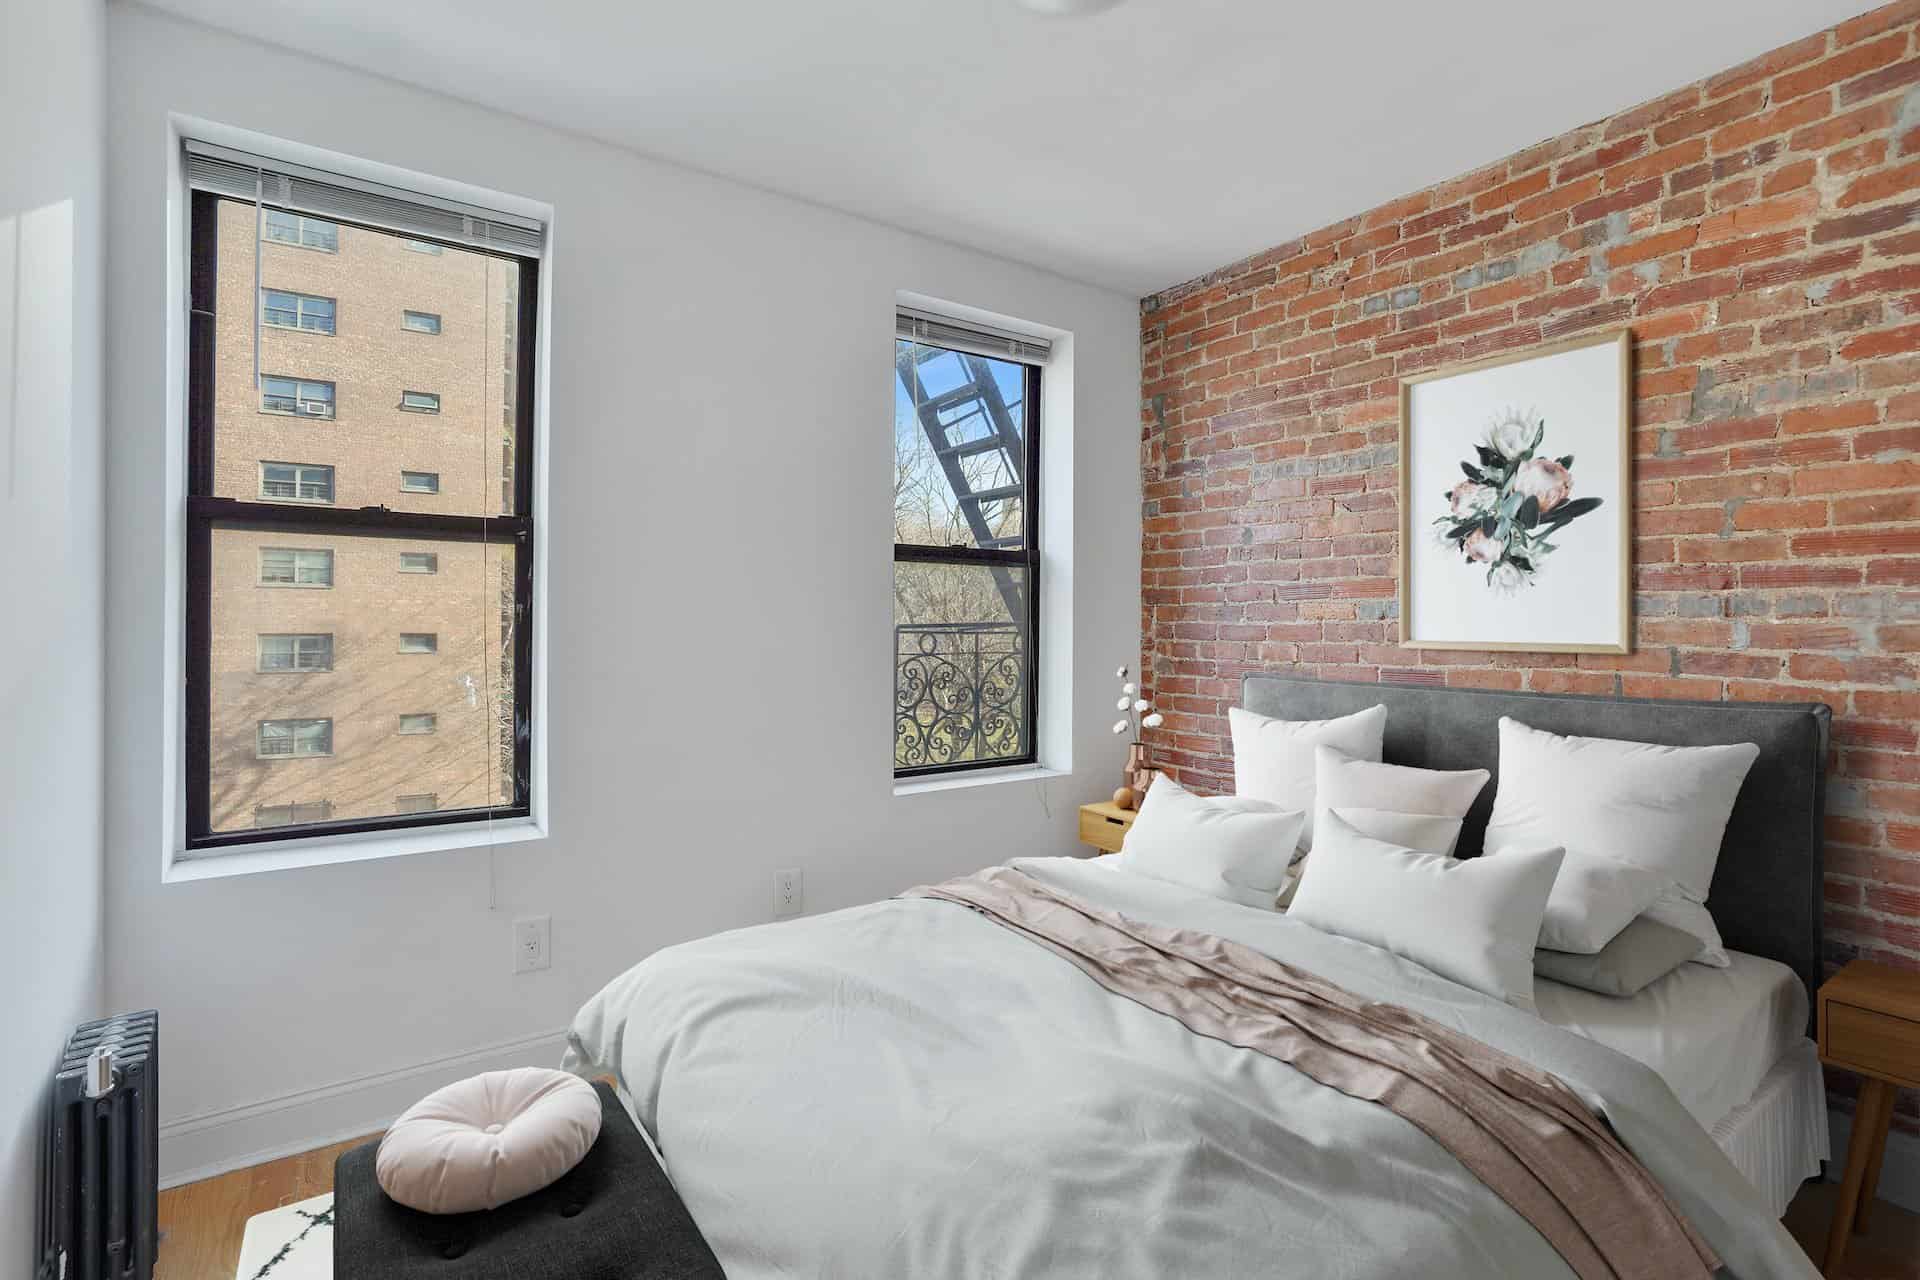 Bedroom at 556-566 West 126th Street apartments. A queen sized bed, brick accent wall, wood side tables and two windows.